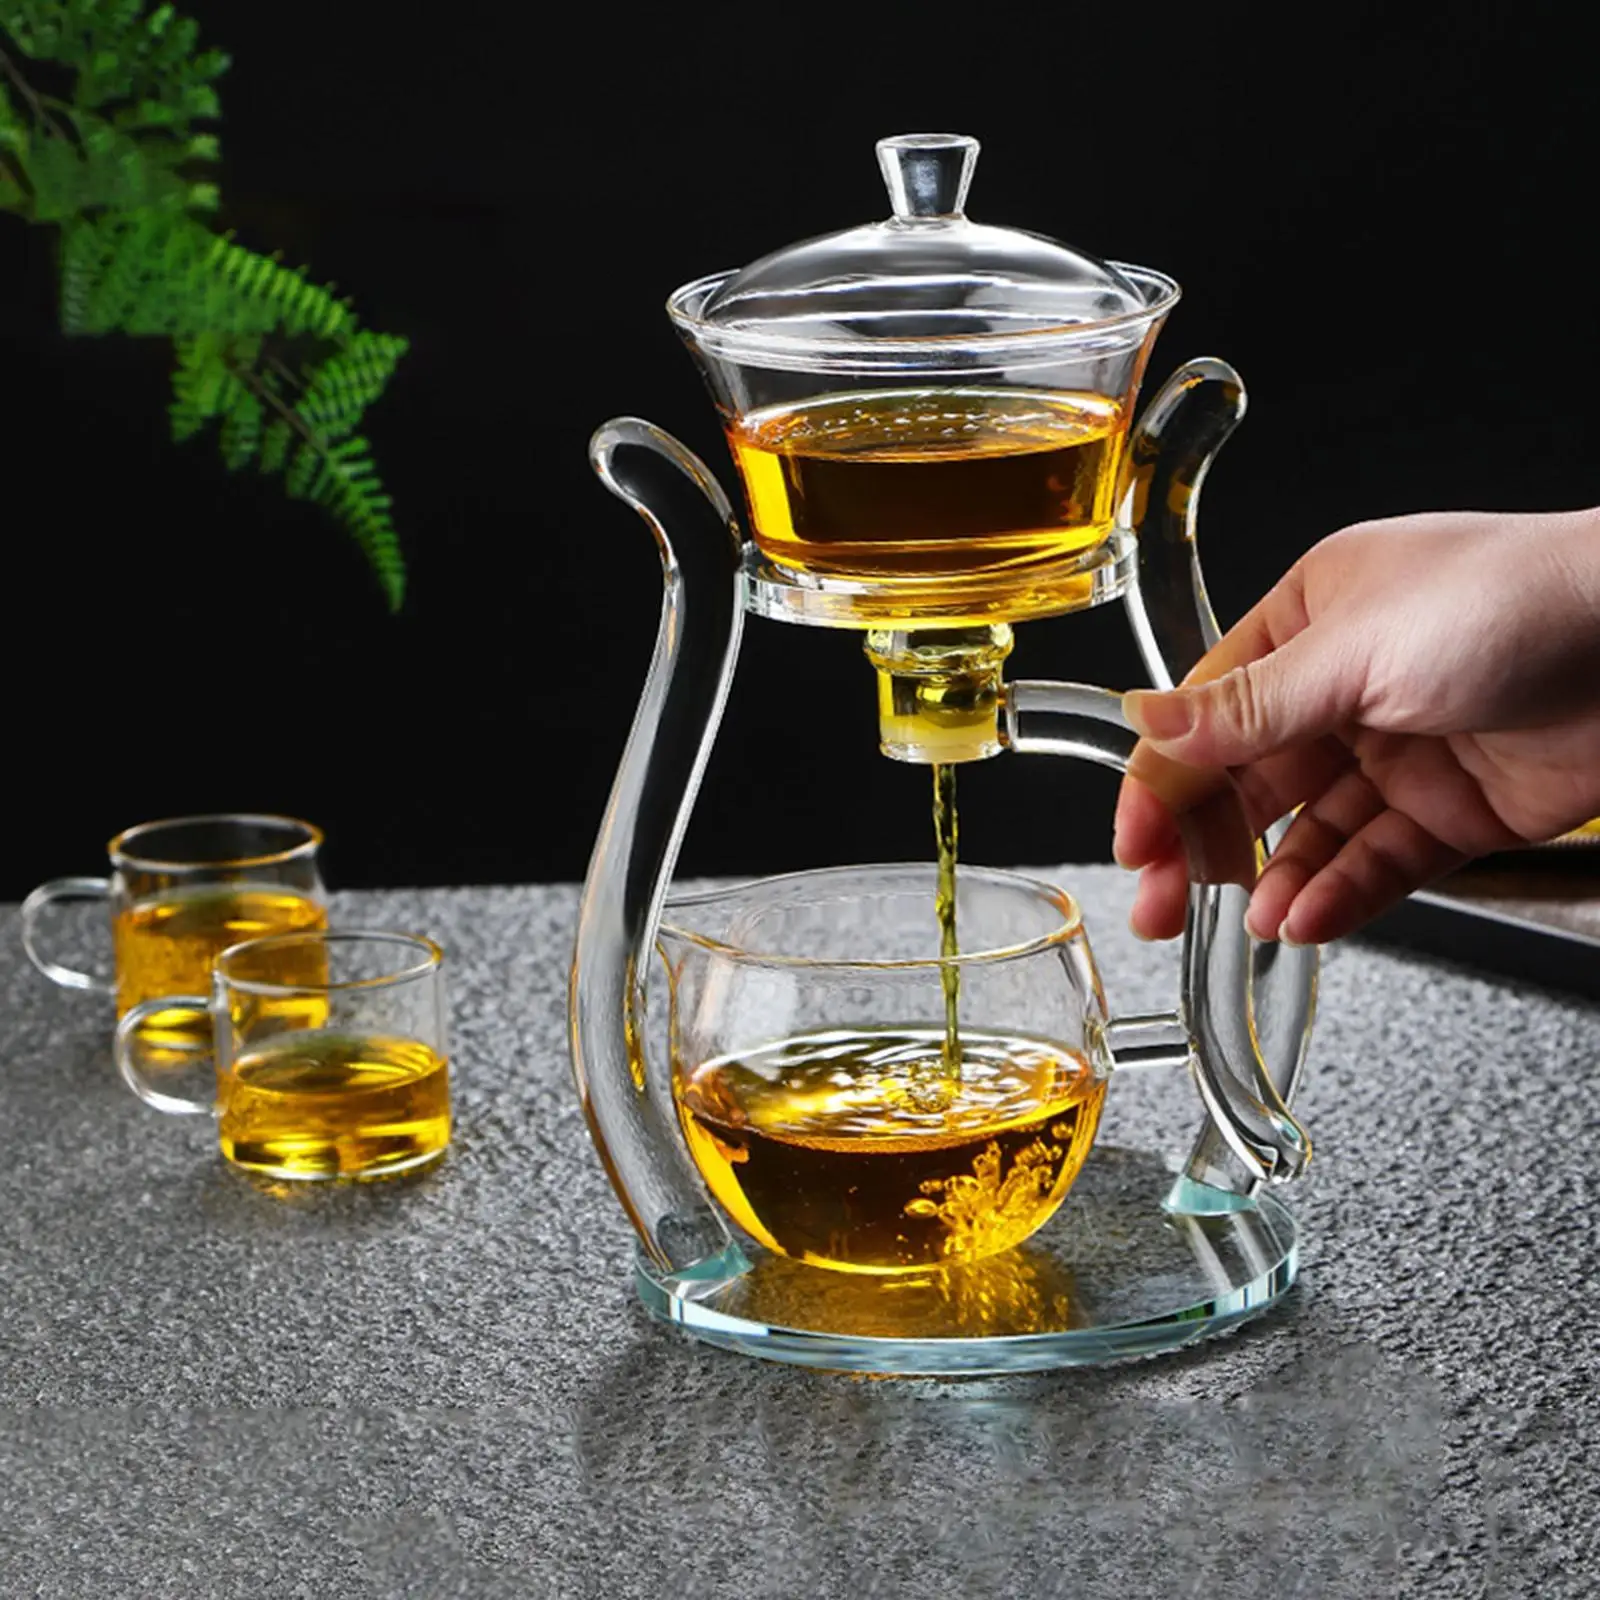 

Semi-Automatic Lazy Kungfu Glass Tea Set, Heat Resistant Teapot Tea Maker for Dining Room Office Tea House Gifts for Friends